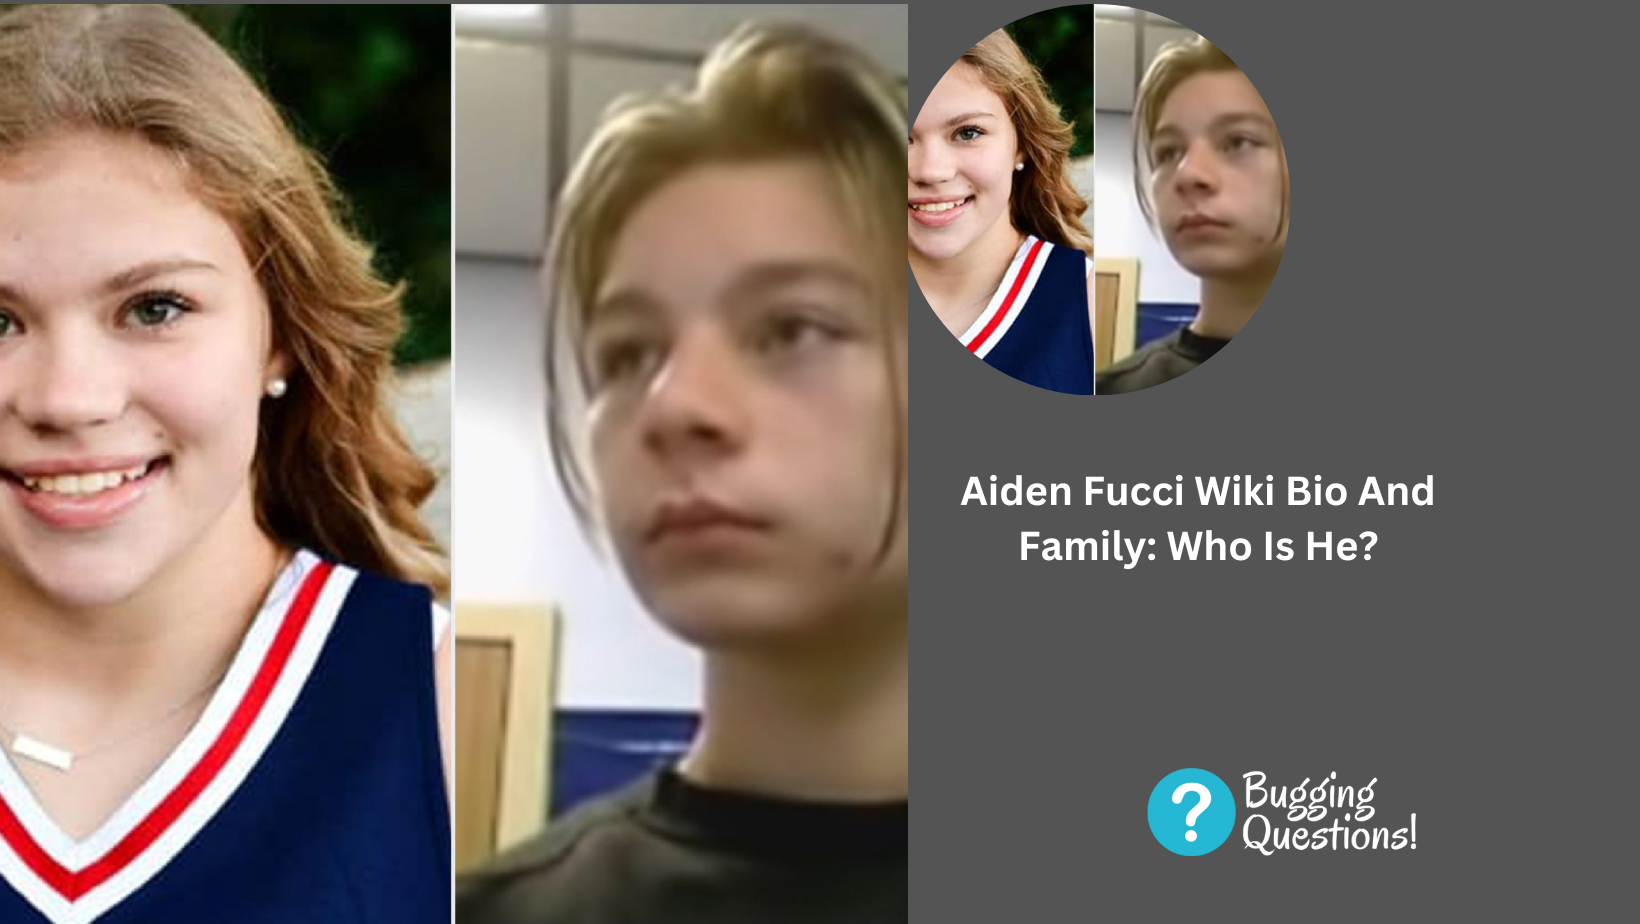 Aiden Fucci Wiki Bio And Family: Who Is He?